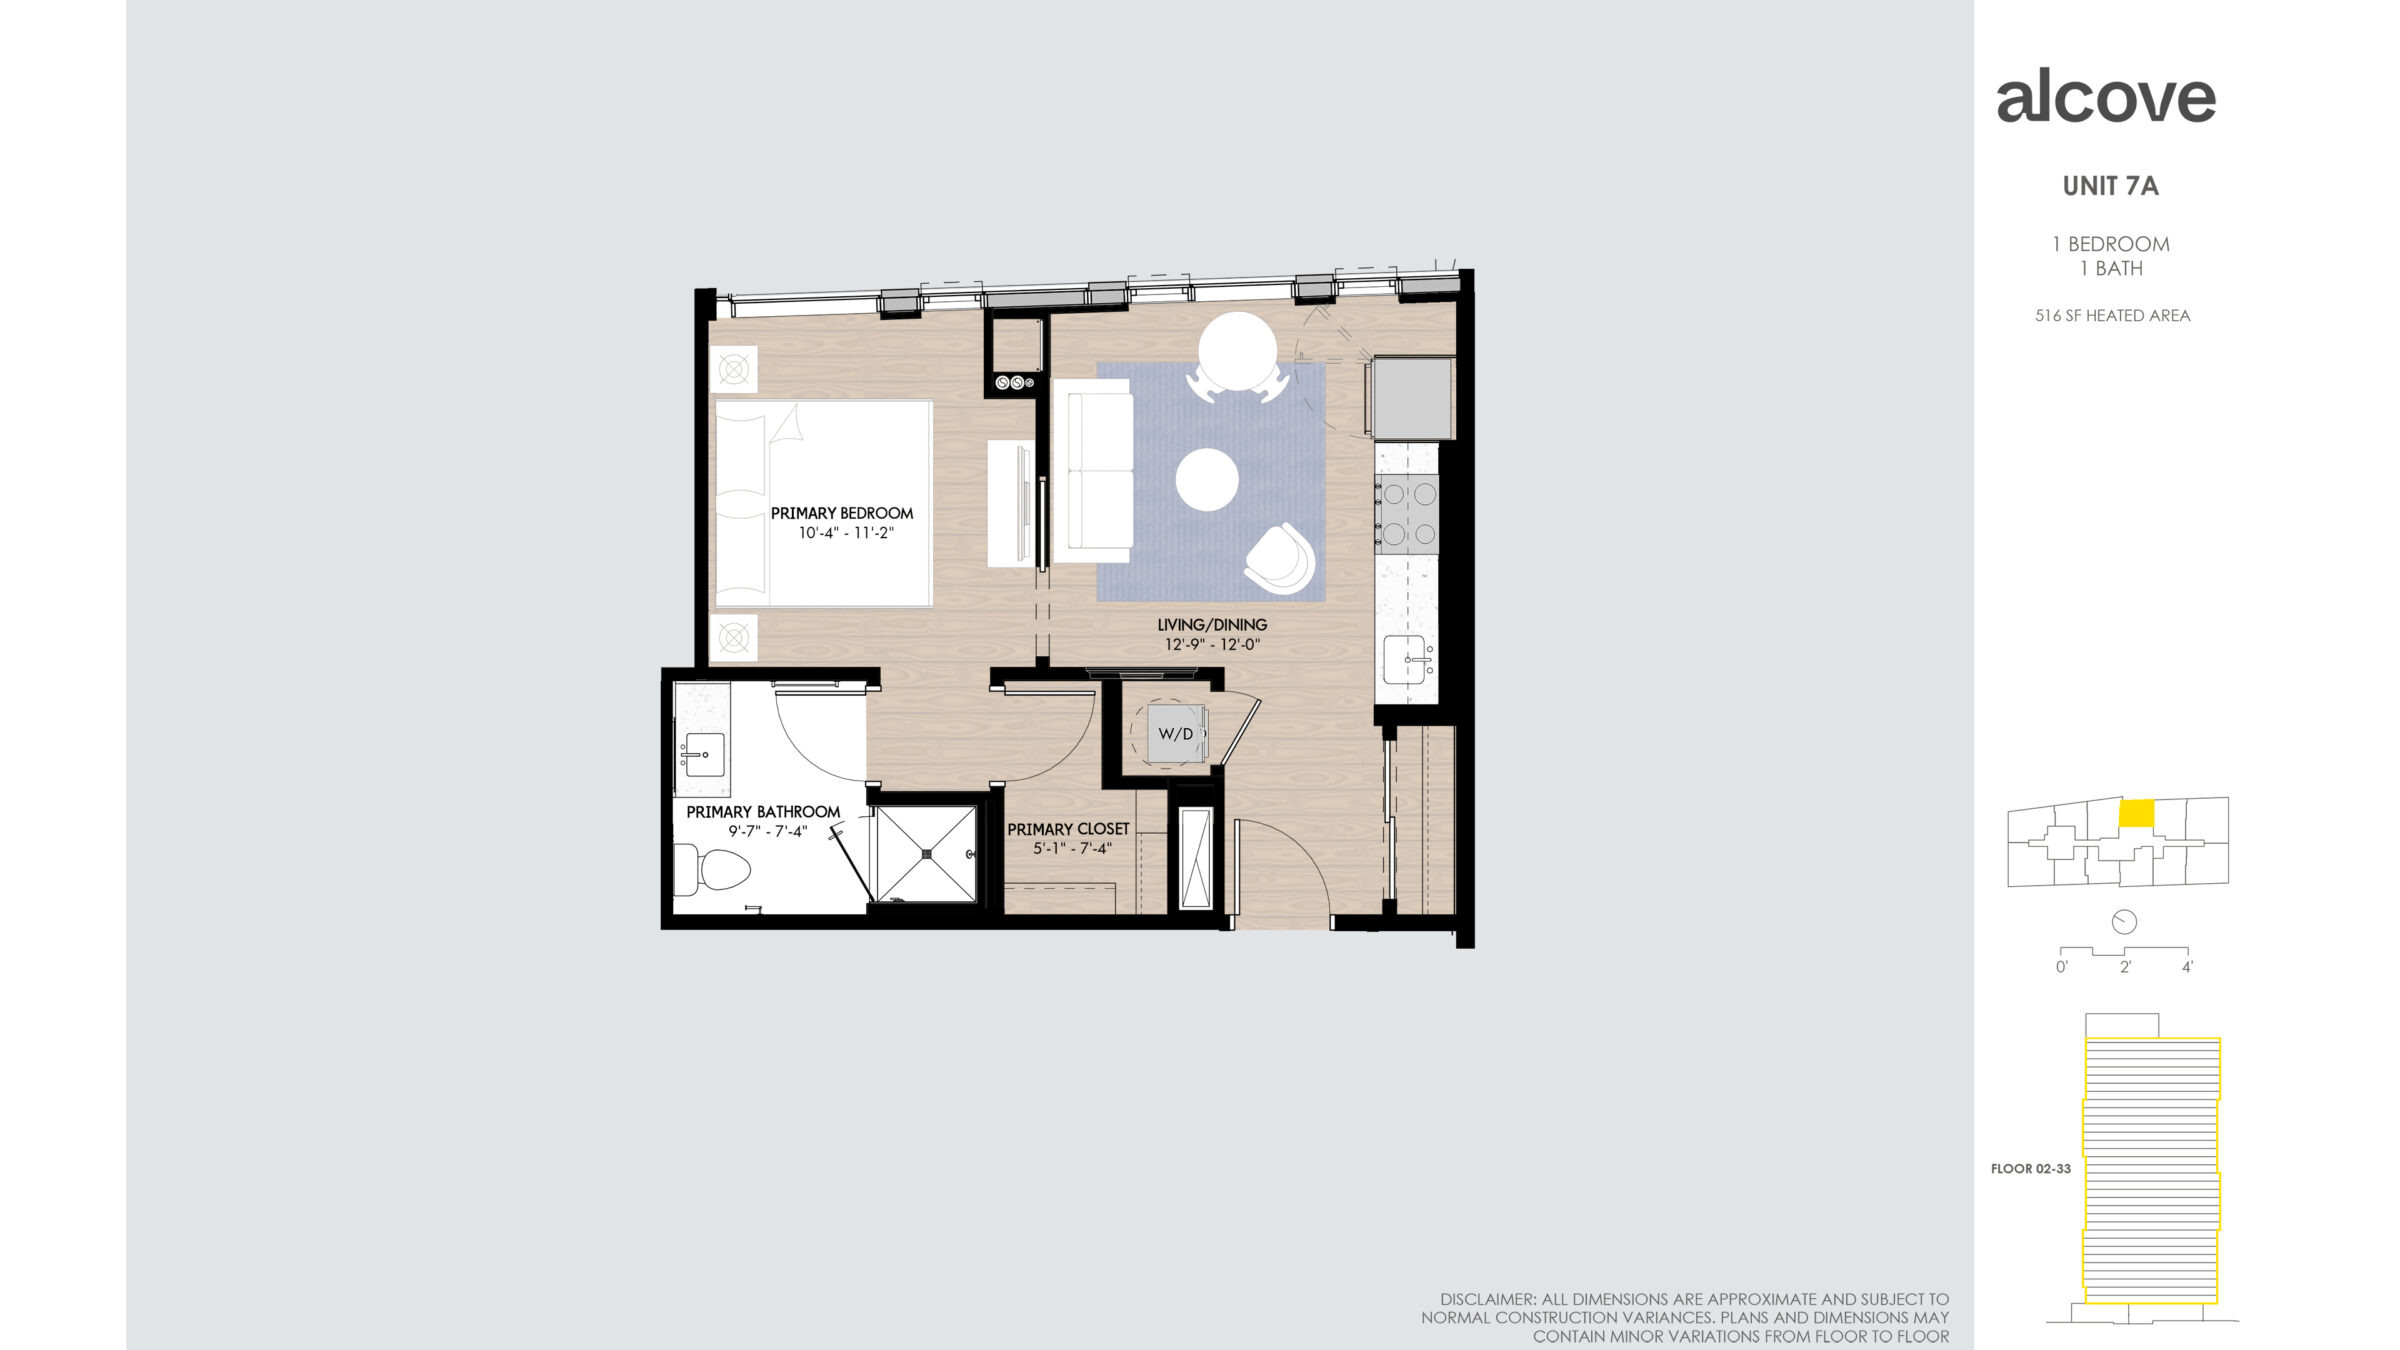 Image reads: UNIT 7A 1 BEDROOM 1 BATH 516 SF HEATED AREA Floor 02-33 Disclaimer: all dimensions are approximate and subject to normal construction variances. Plans and dimensions may contain minor variations from floor to floor.